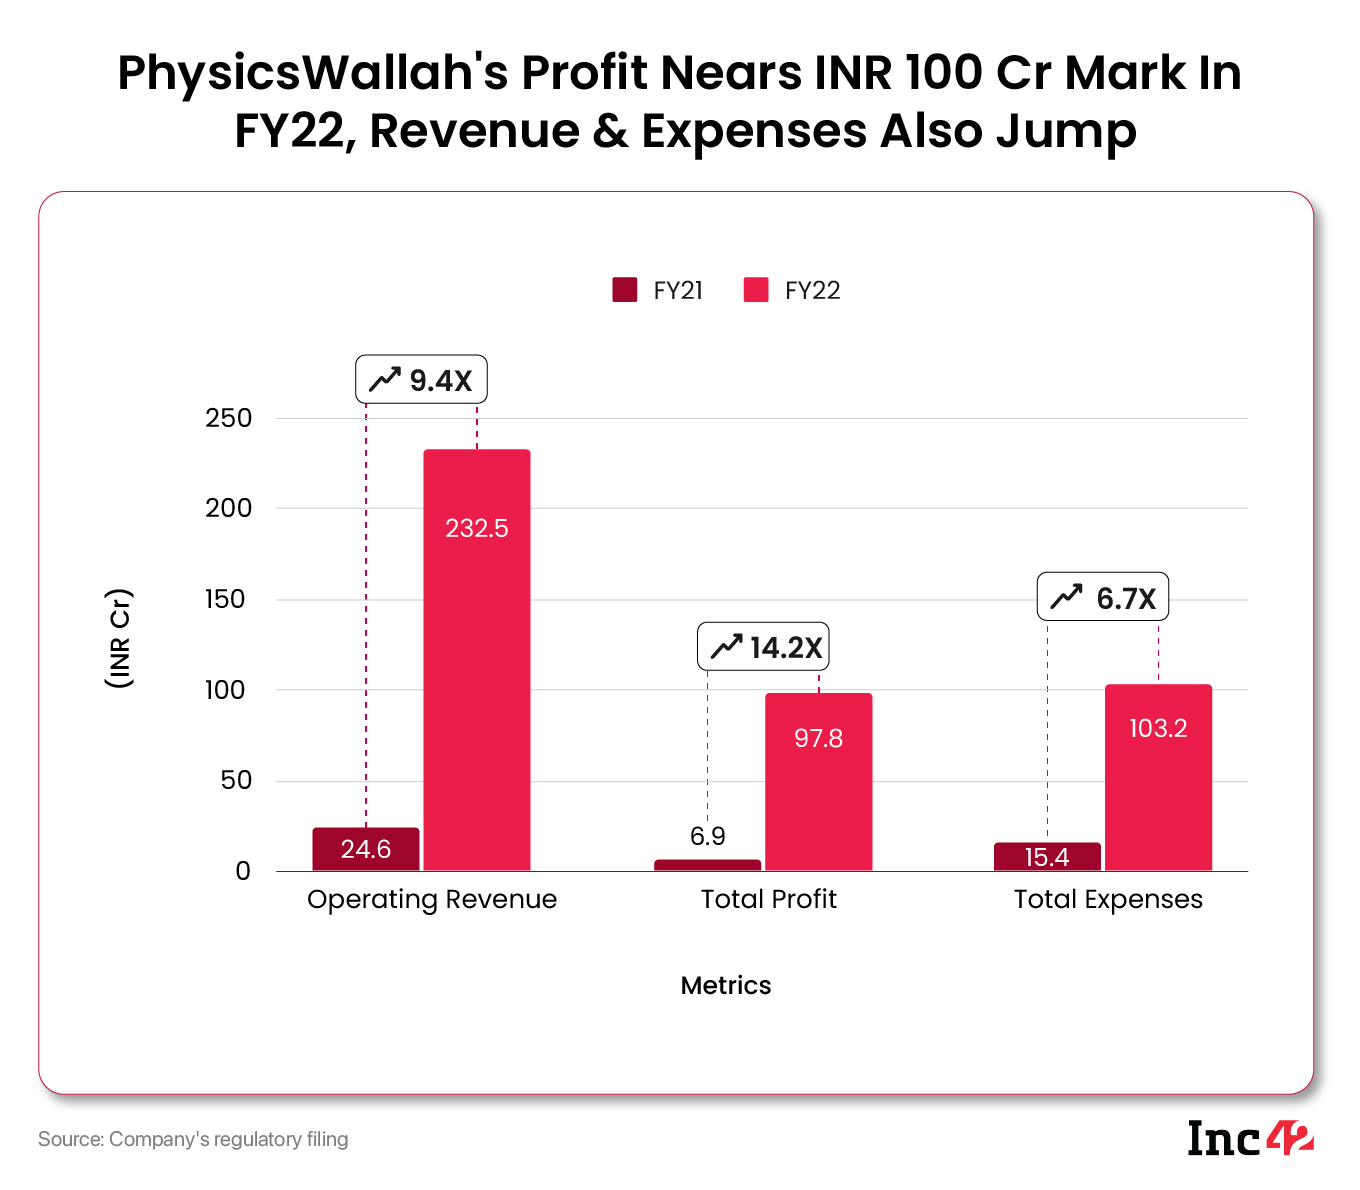 Edtech Unicorn PhysicsWallah’s Profit Jumps 14X YoY To INR 98 Cr In FY22